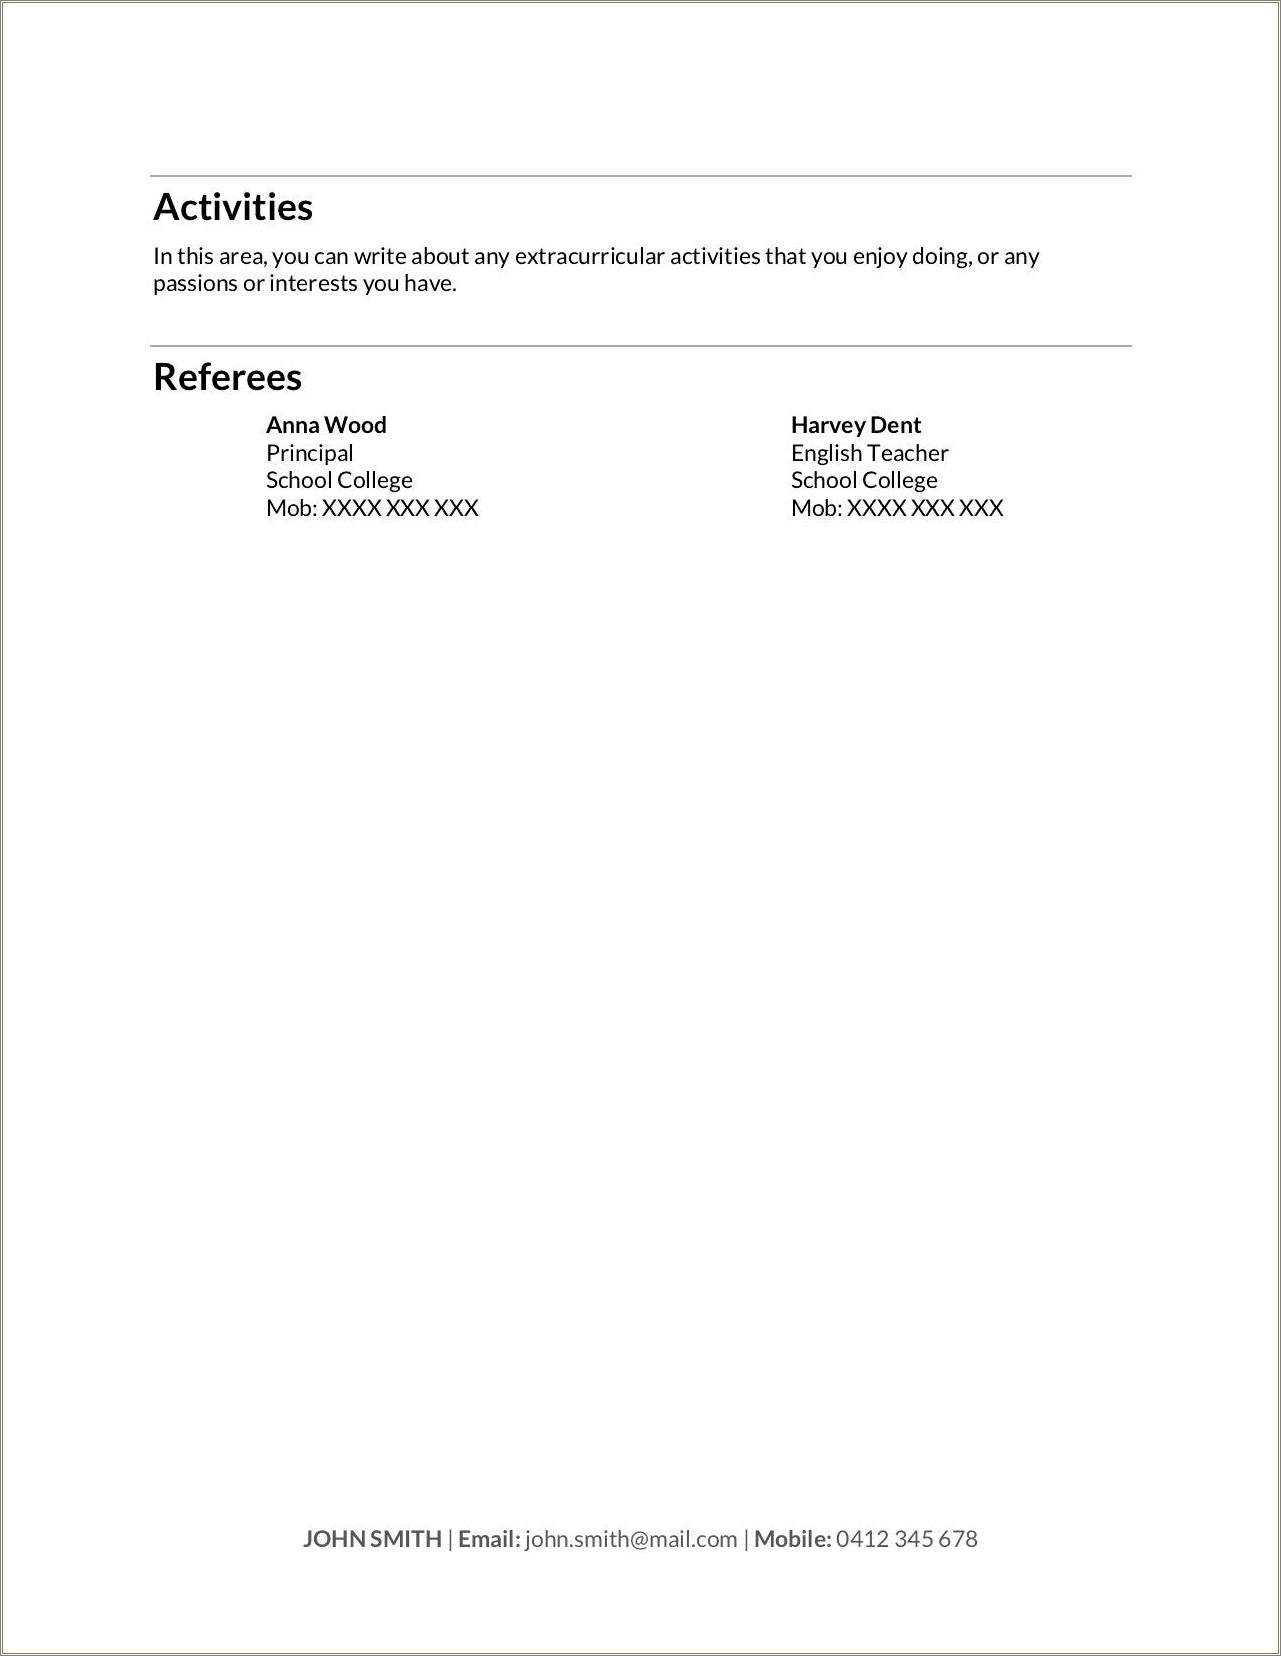 Psychologist Reference Sheet Example For Resume